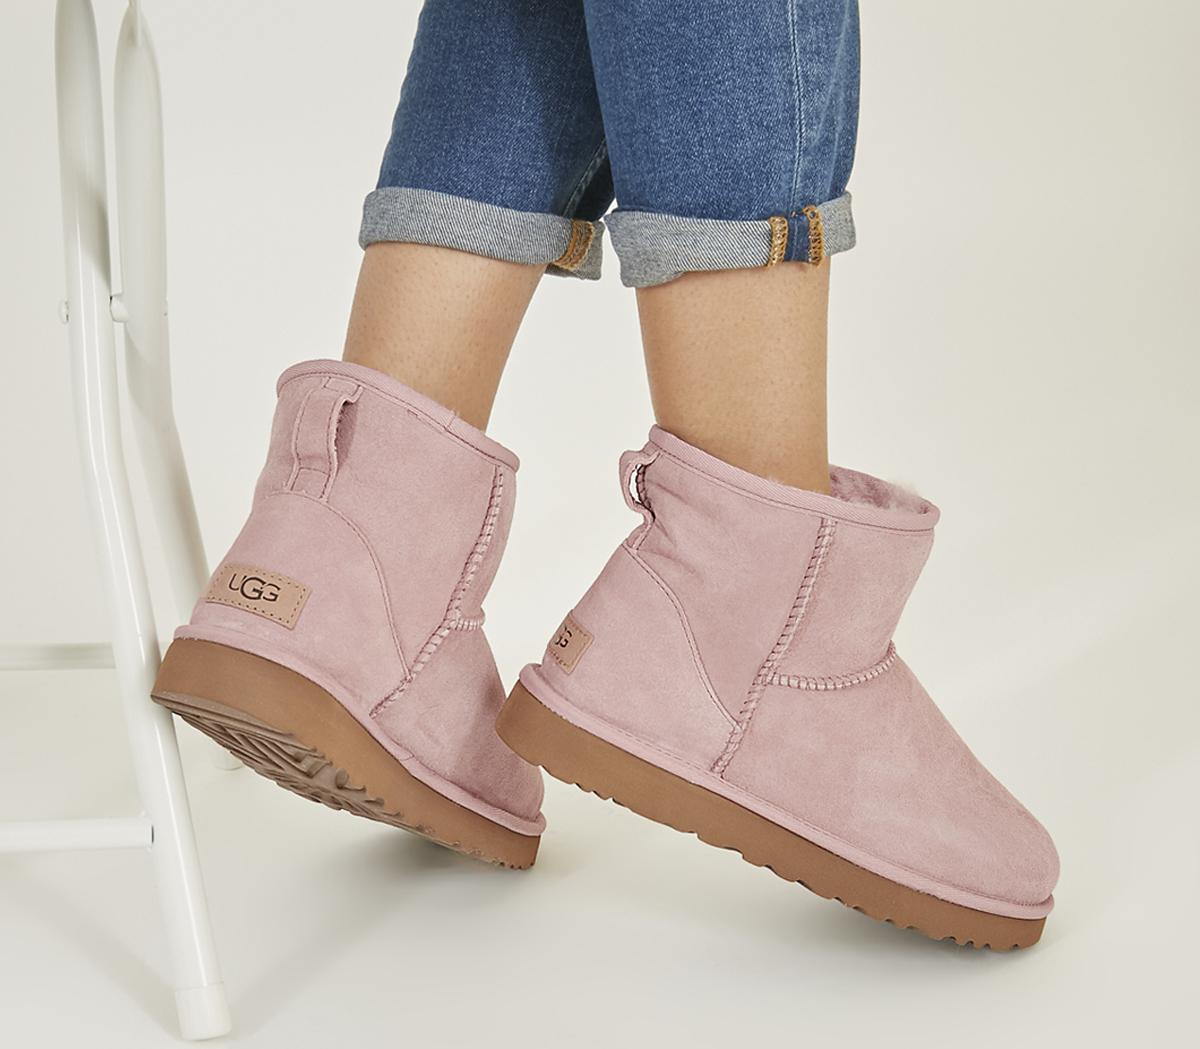 new pink ugg boots